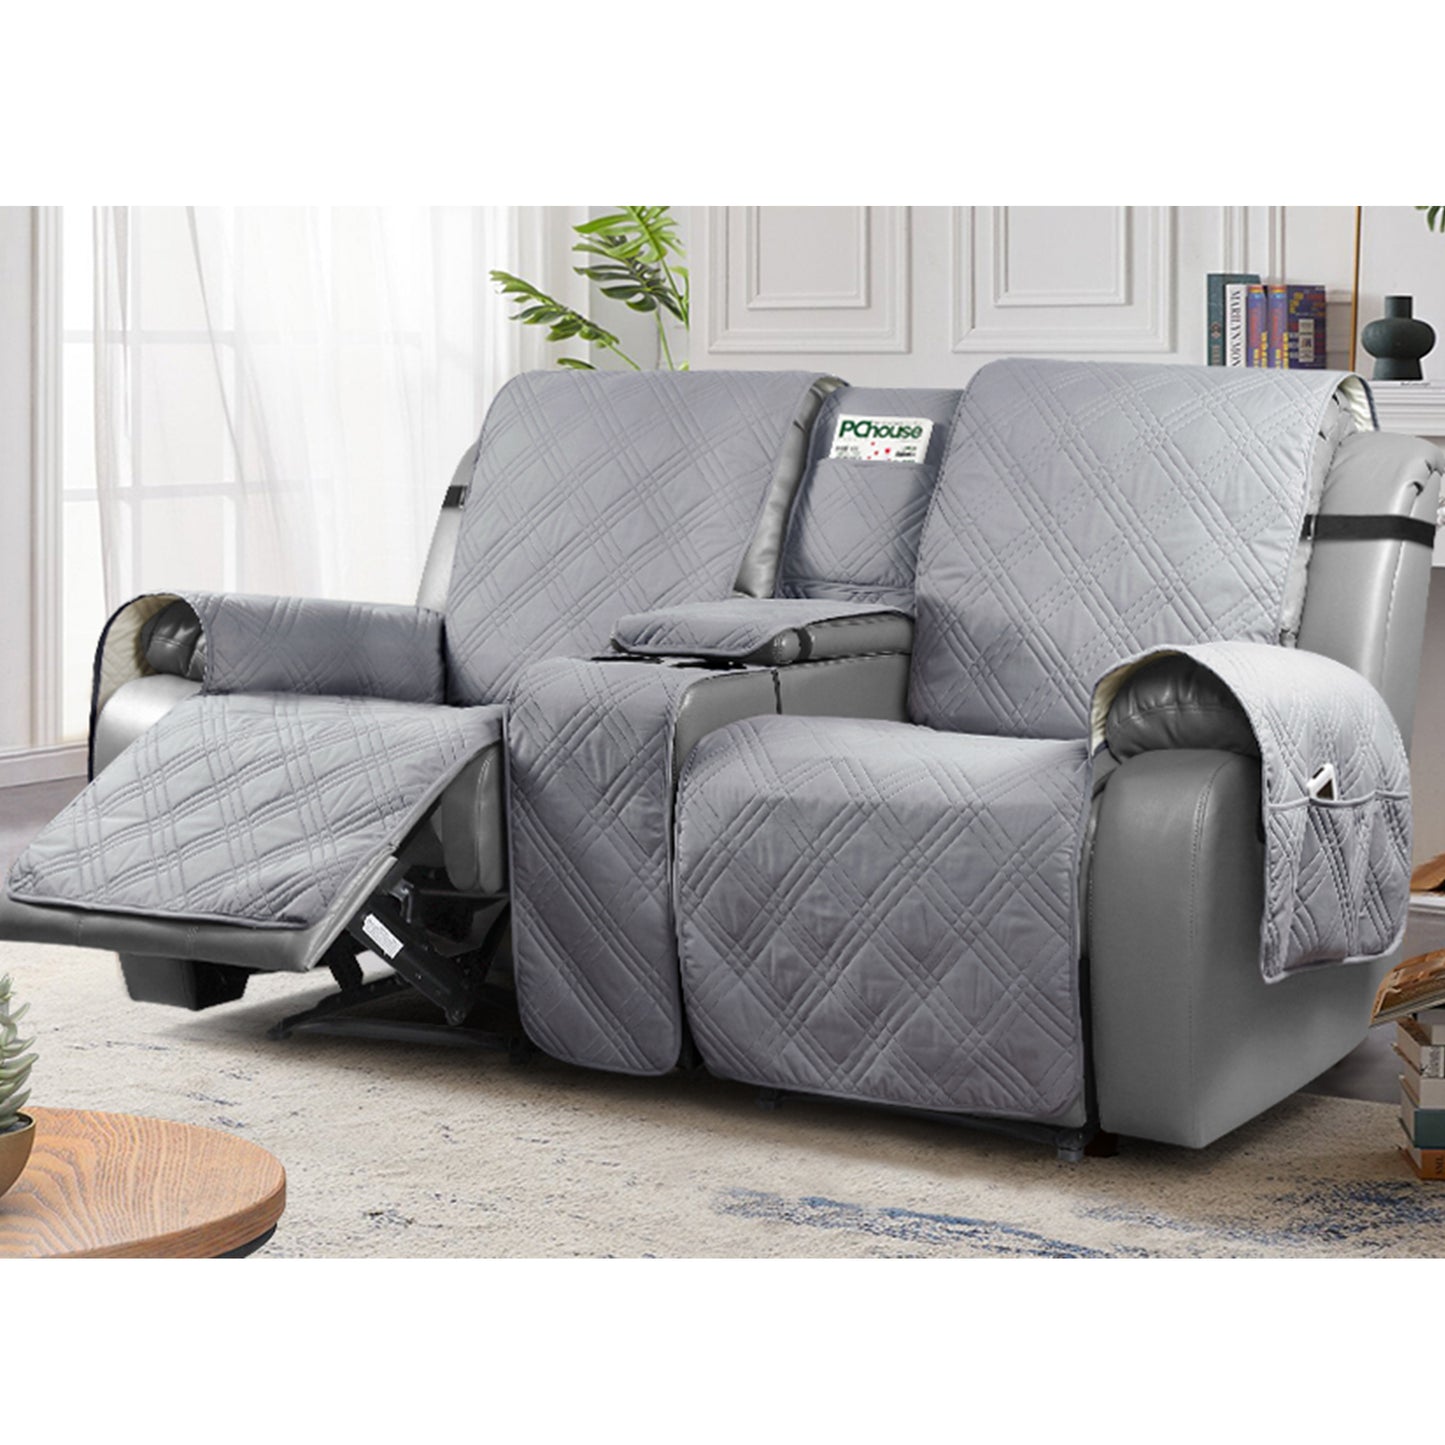 TAOCOCO 100% Loveseat Recliner Cover with Center Console 2